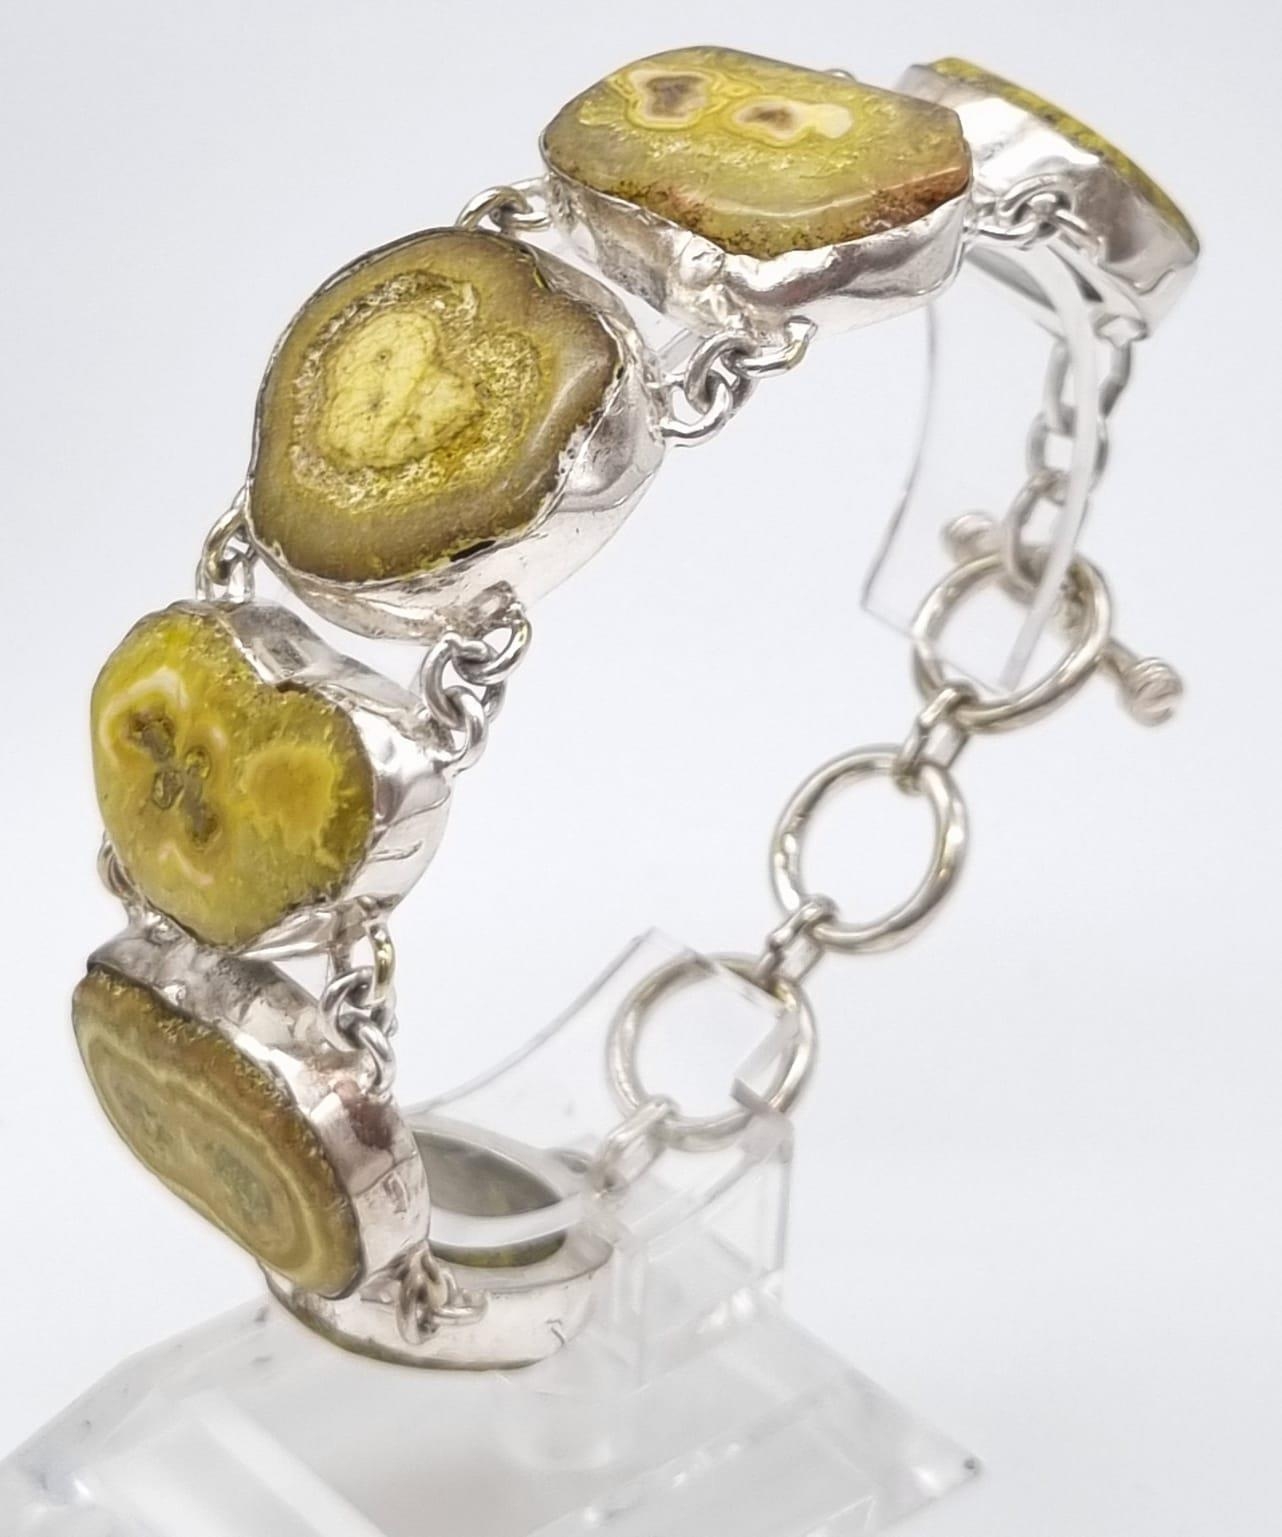 A very unusual and unique, sterling silver, yellow solar quartz necklace, bracelet and earrings set. - Image 5 of 5